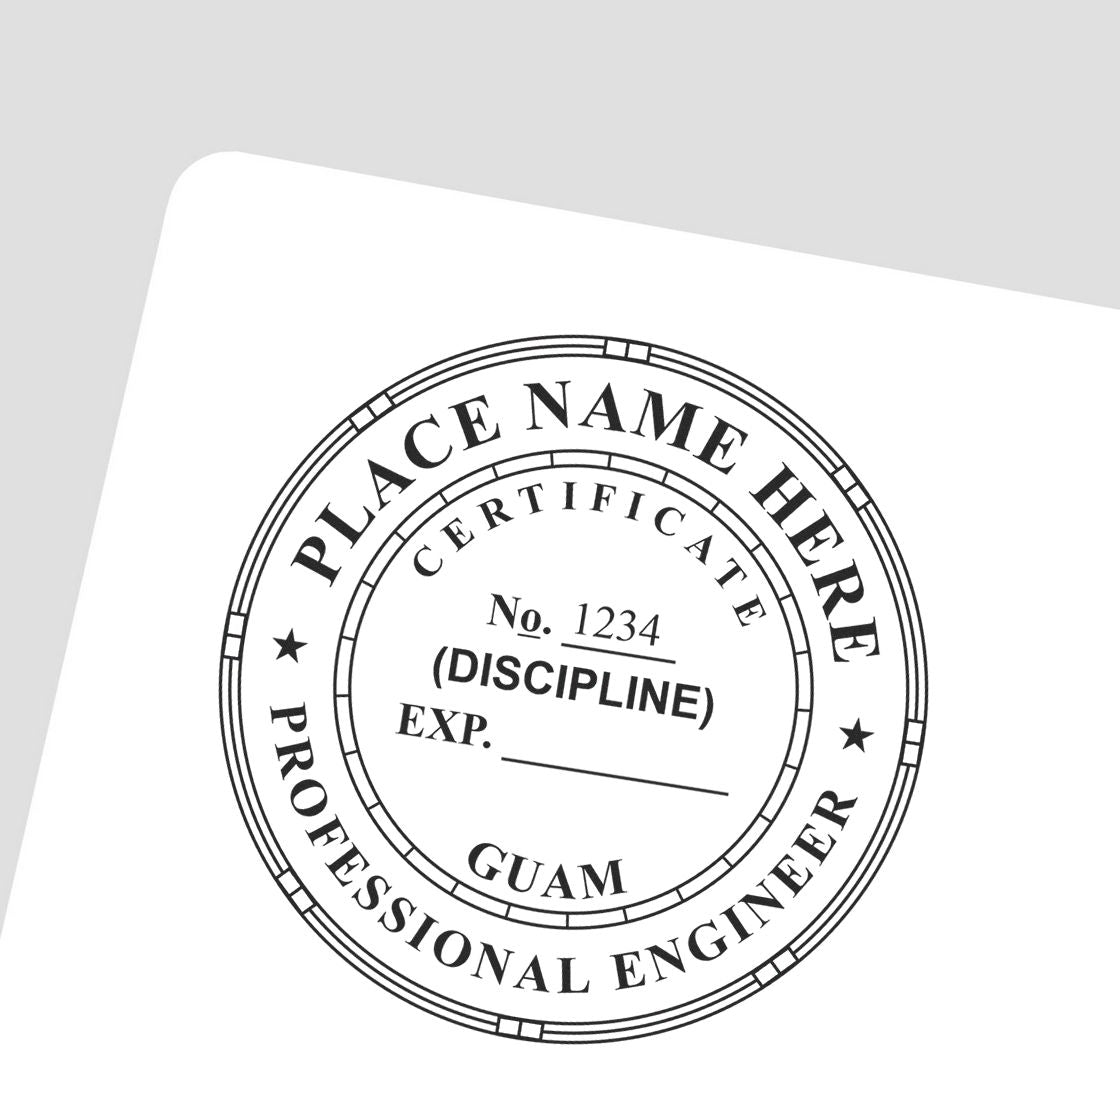 A lifestyle photo showing a stamped image of the Slim Pre-Inked Guam Professional Engineer Seal Stamp on a piece of paper